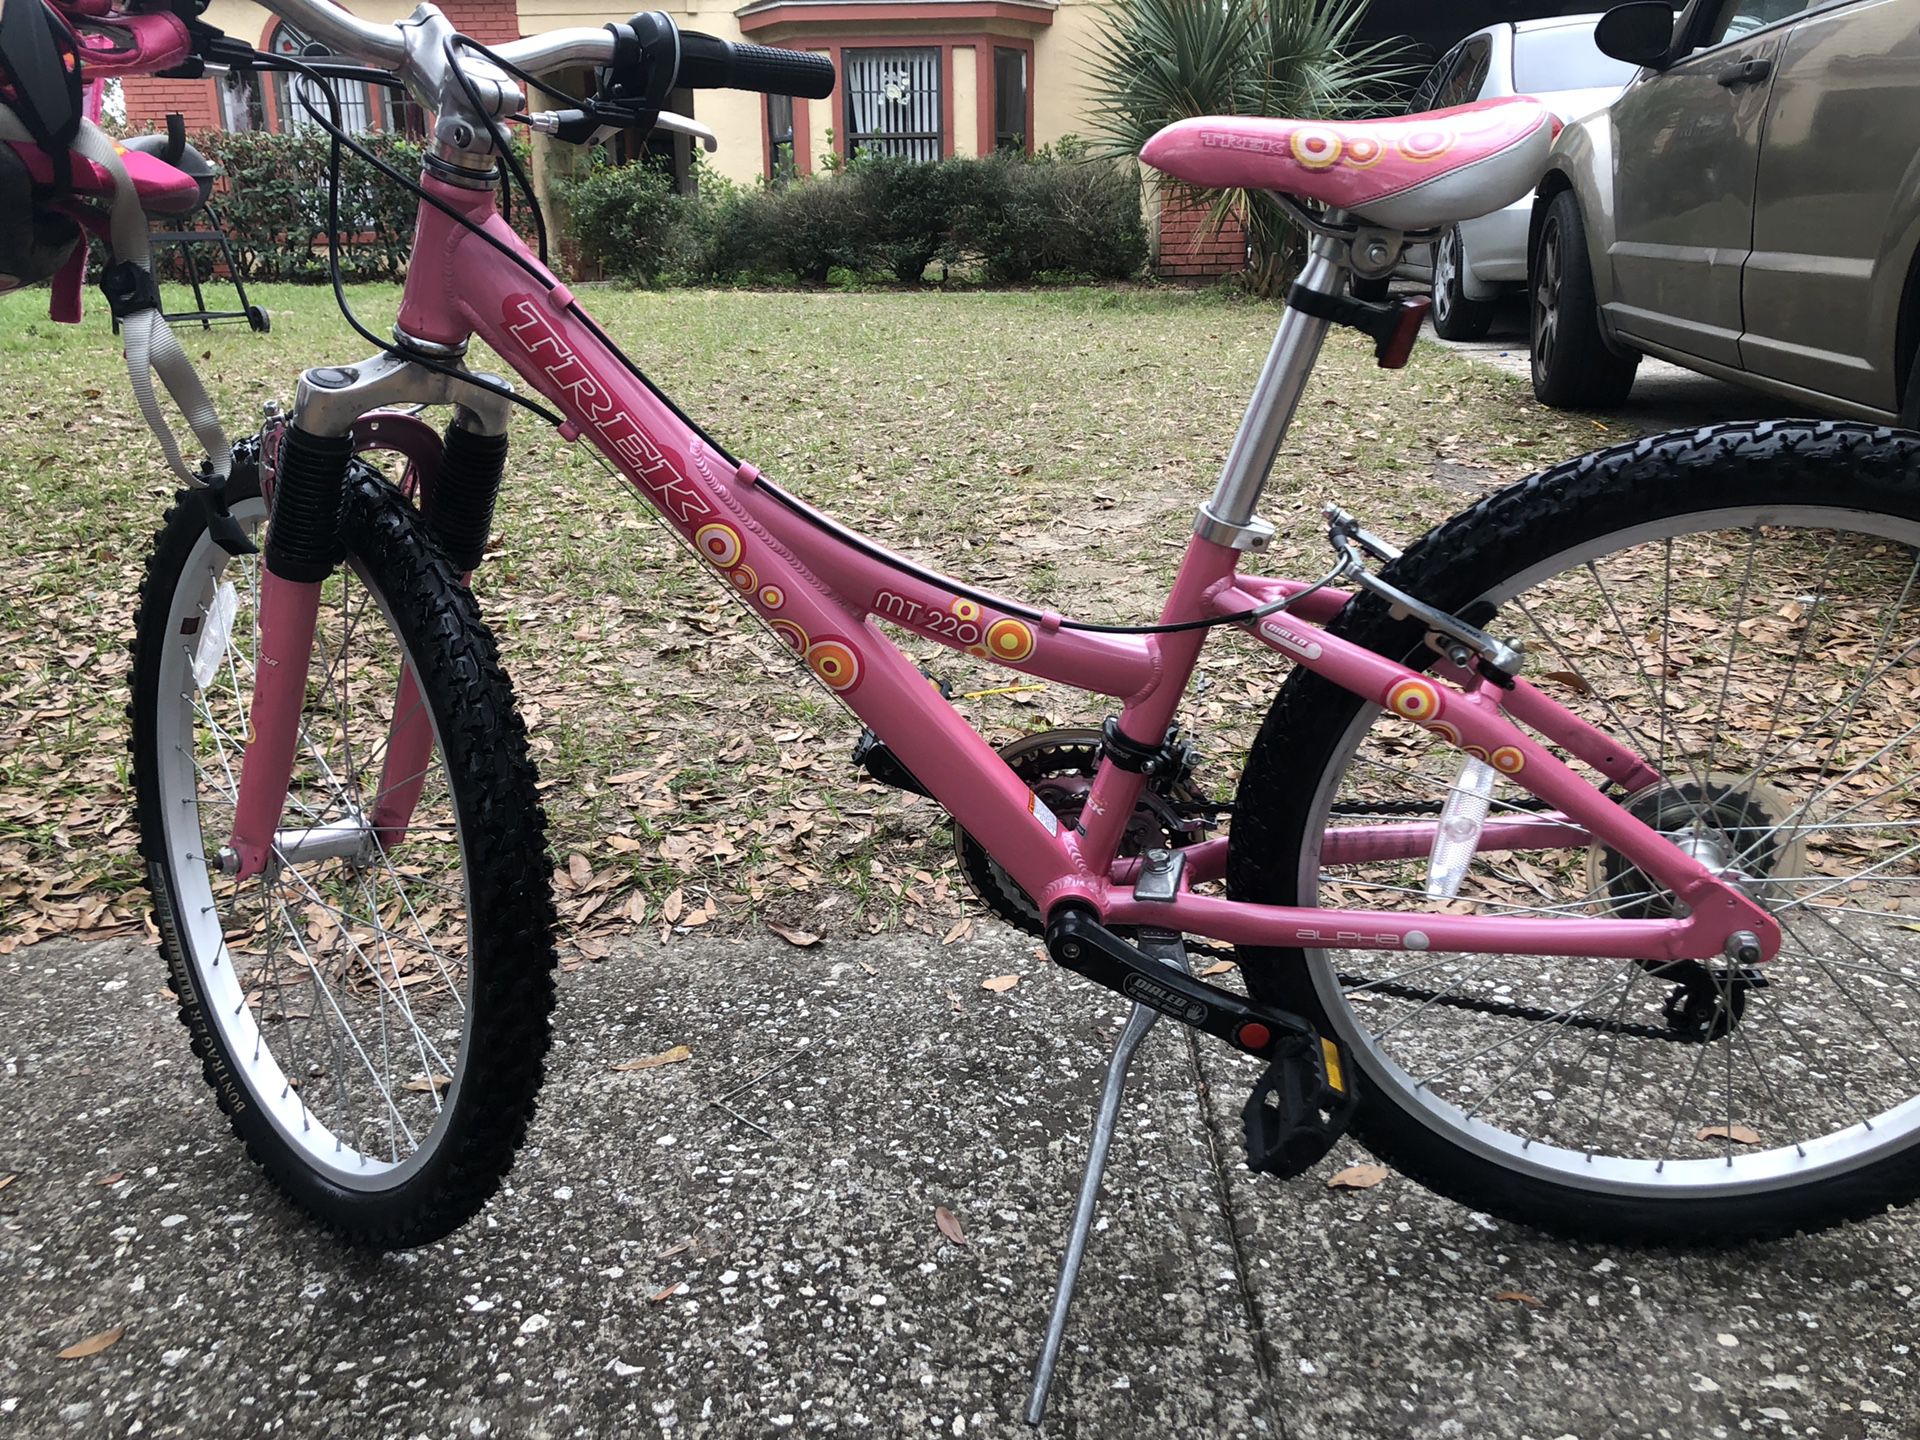 Girls trek mt220 mountain bike very good condition. Helmet and pads included